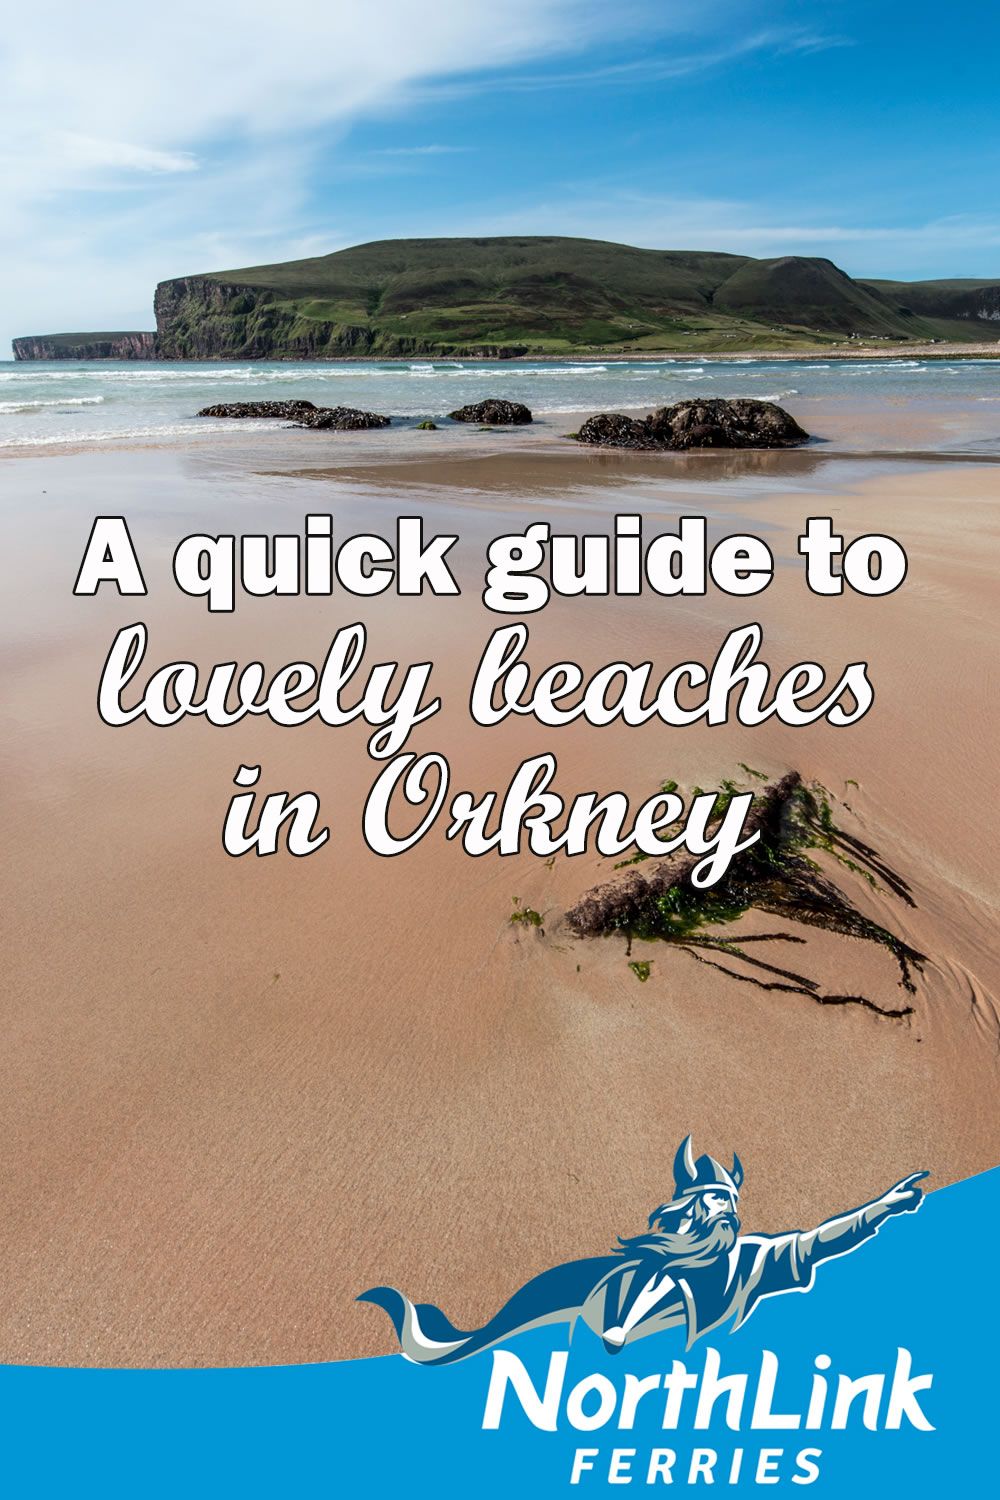 A quick guide to lovely beaches in Orkney